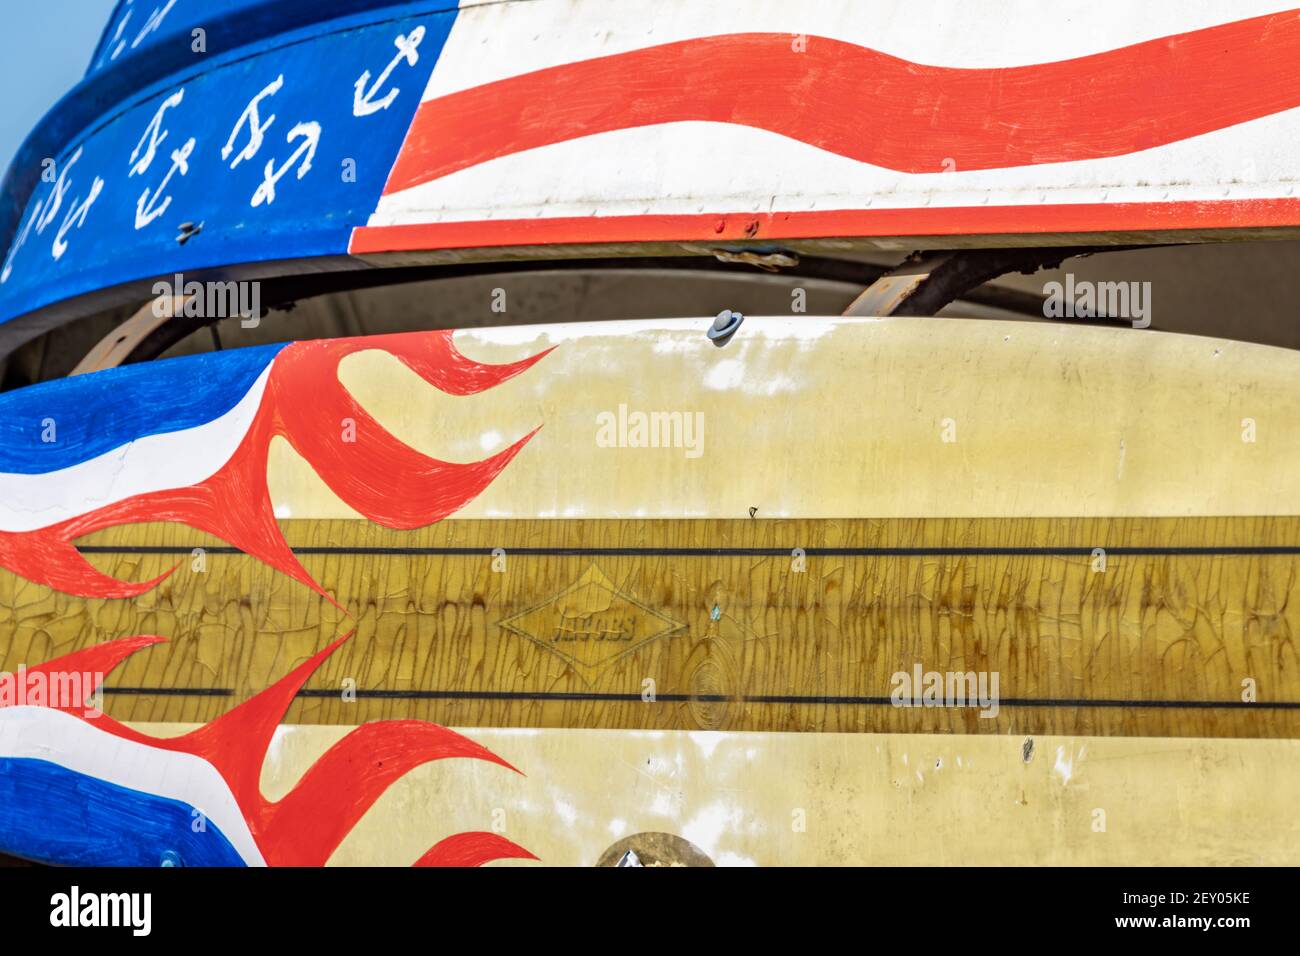 Detail image of a surf board and a small boat painted red, white and blue Stock Photo